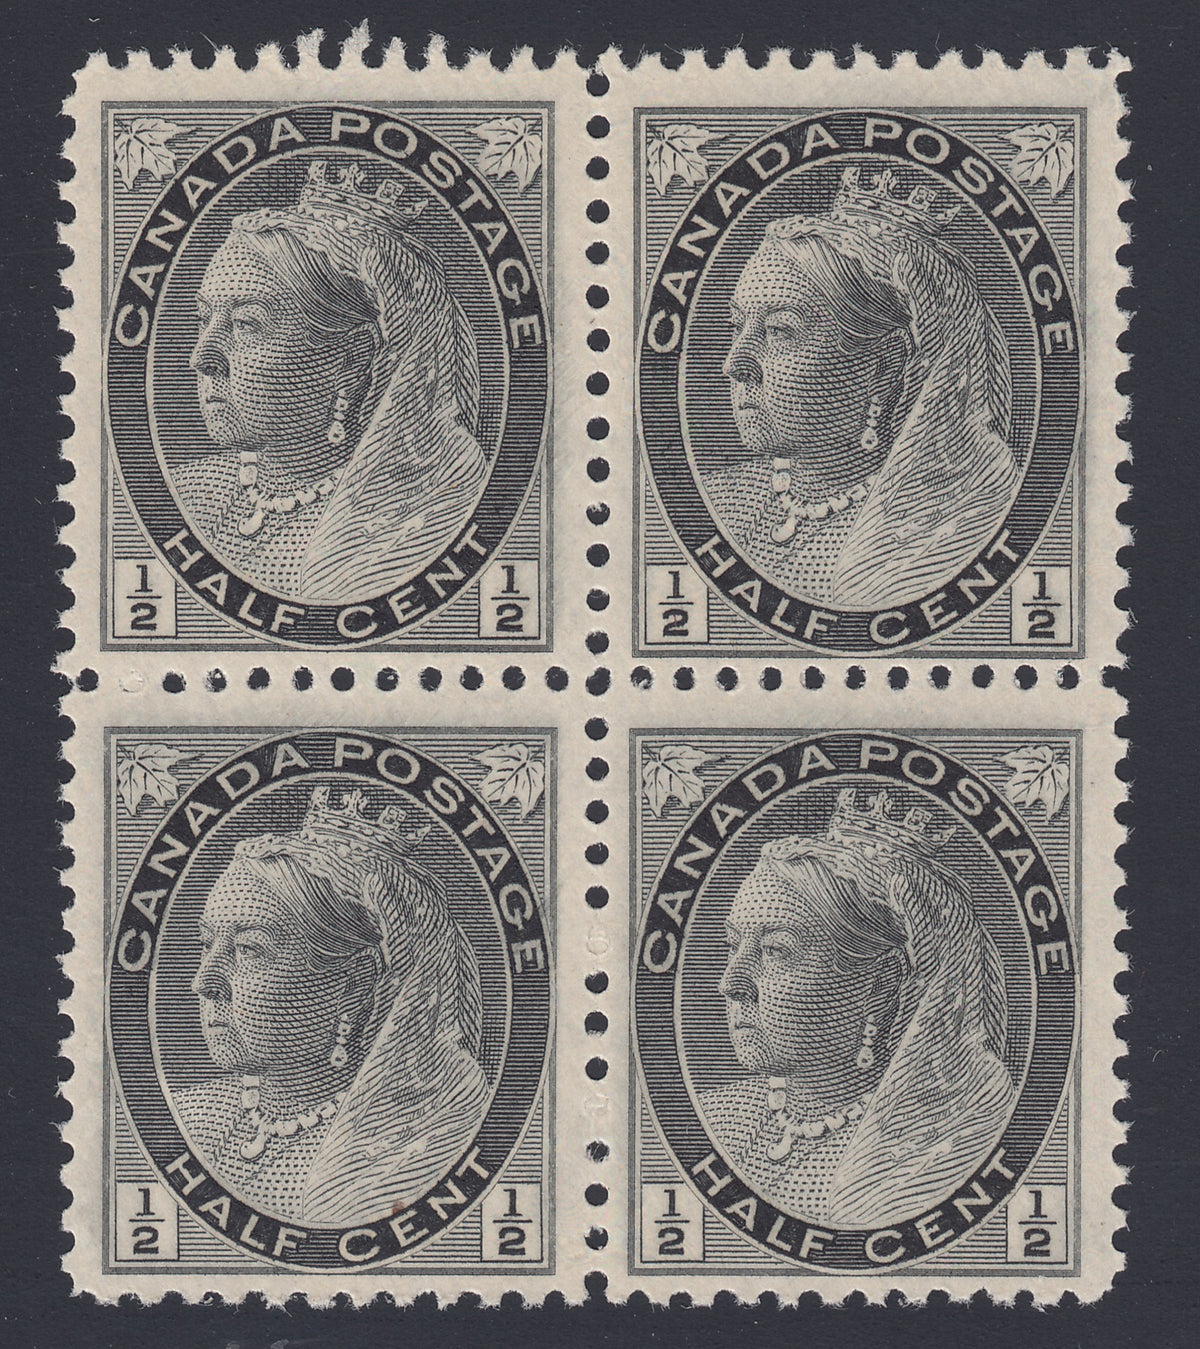 0074CA1708 - Canada #74 - Mint Re-entry Block of 4